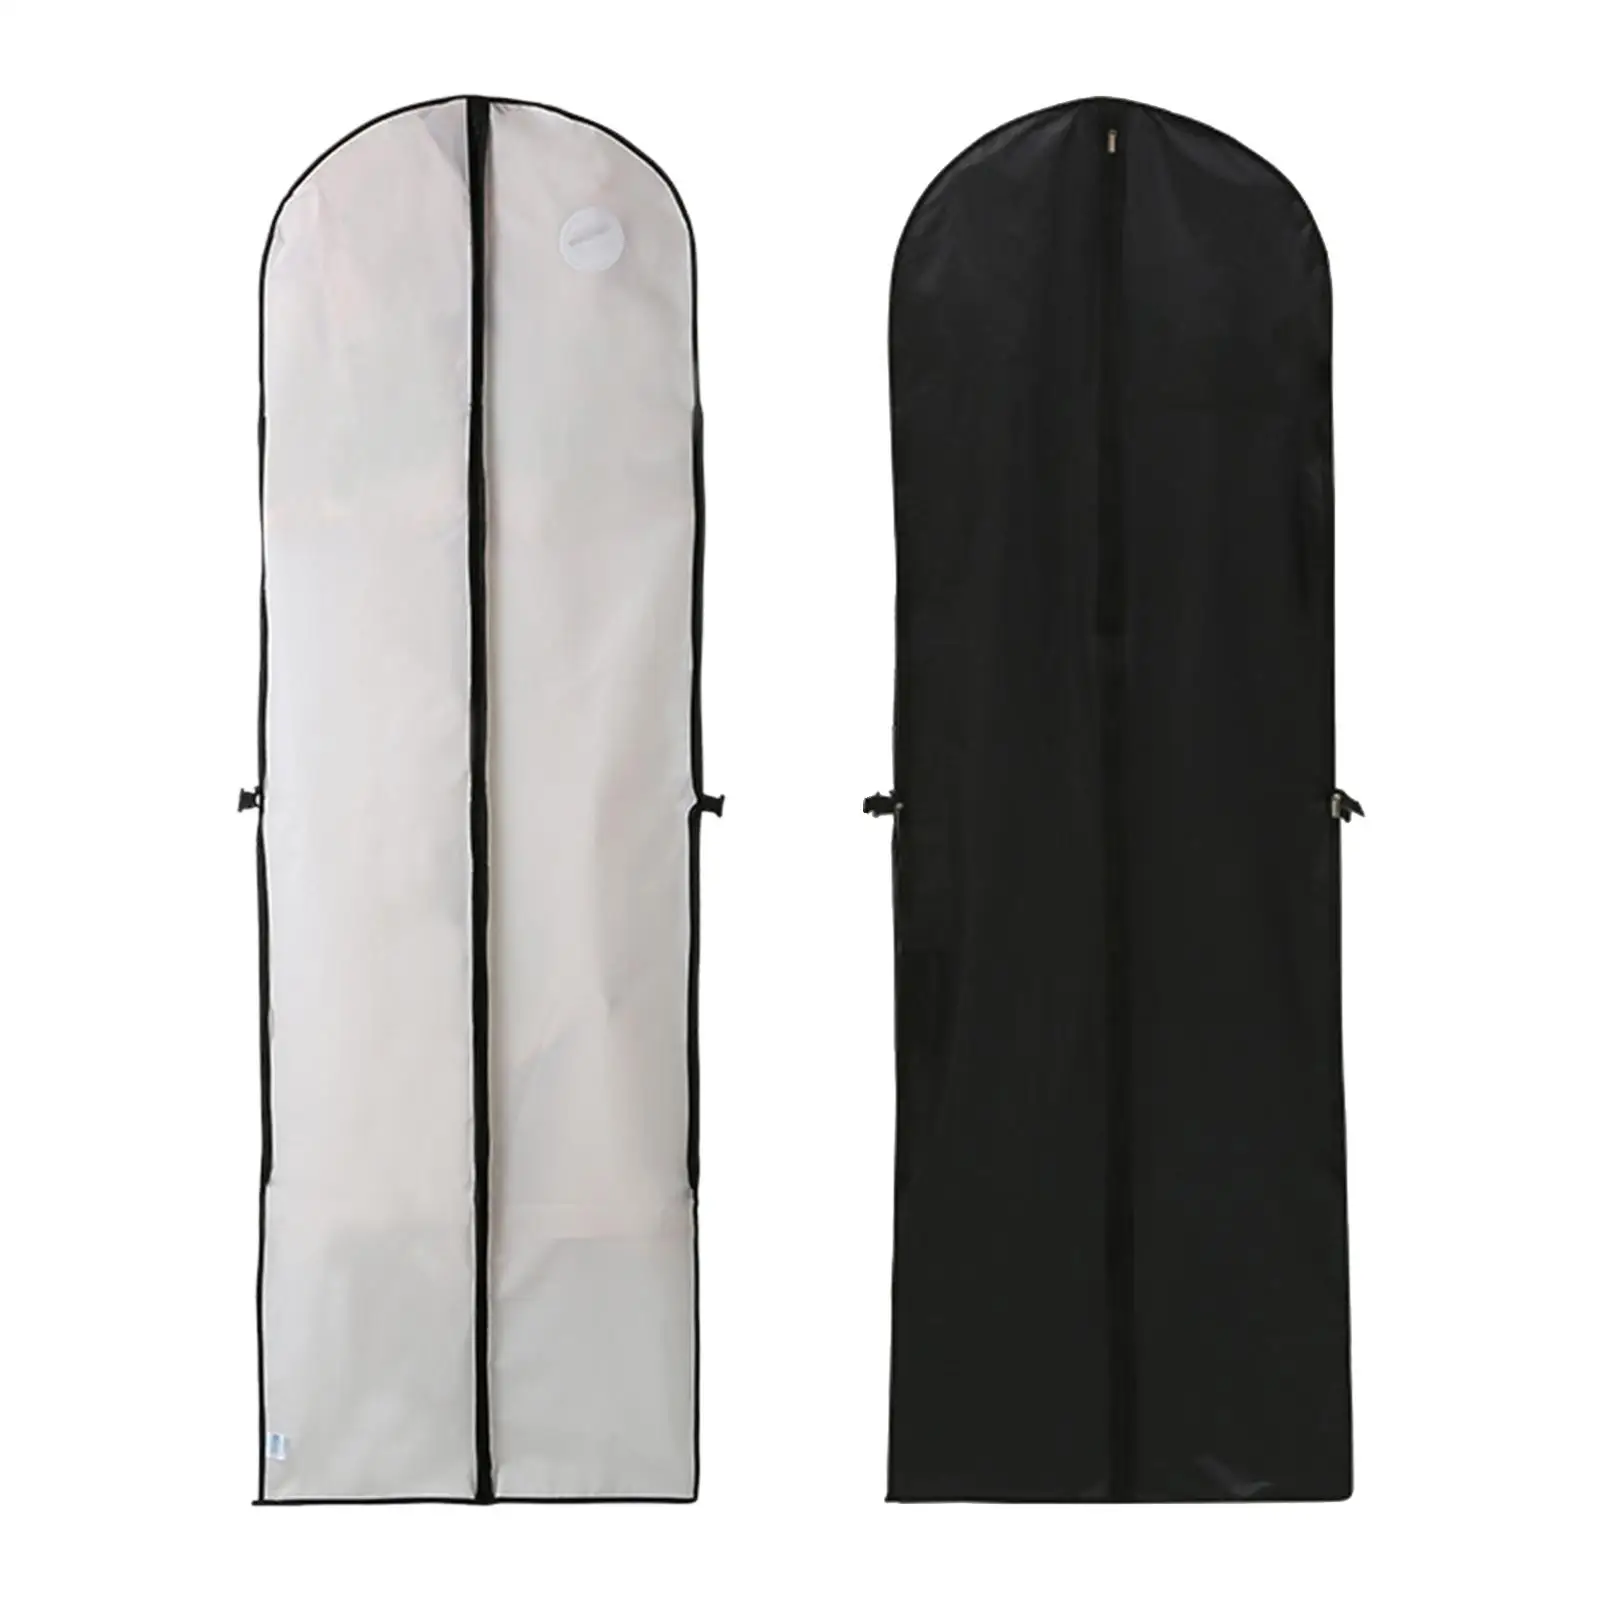 Hanging Clothes Dust Bags Durable Waterproof with Handle Easy to Carry Suit Bag for Coats Sweaters Uniform Tuxedos Office